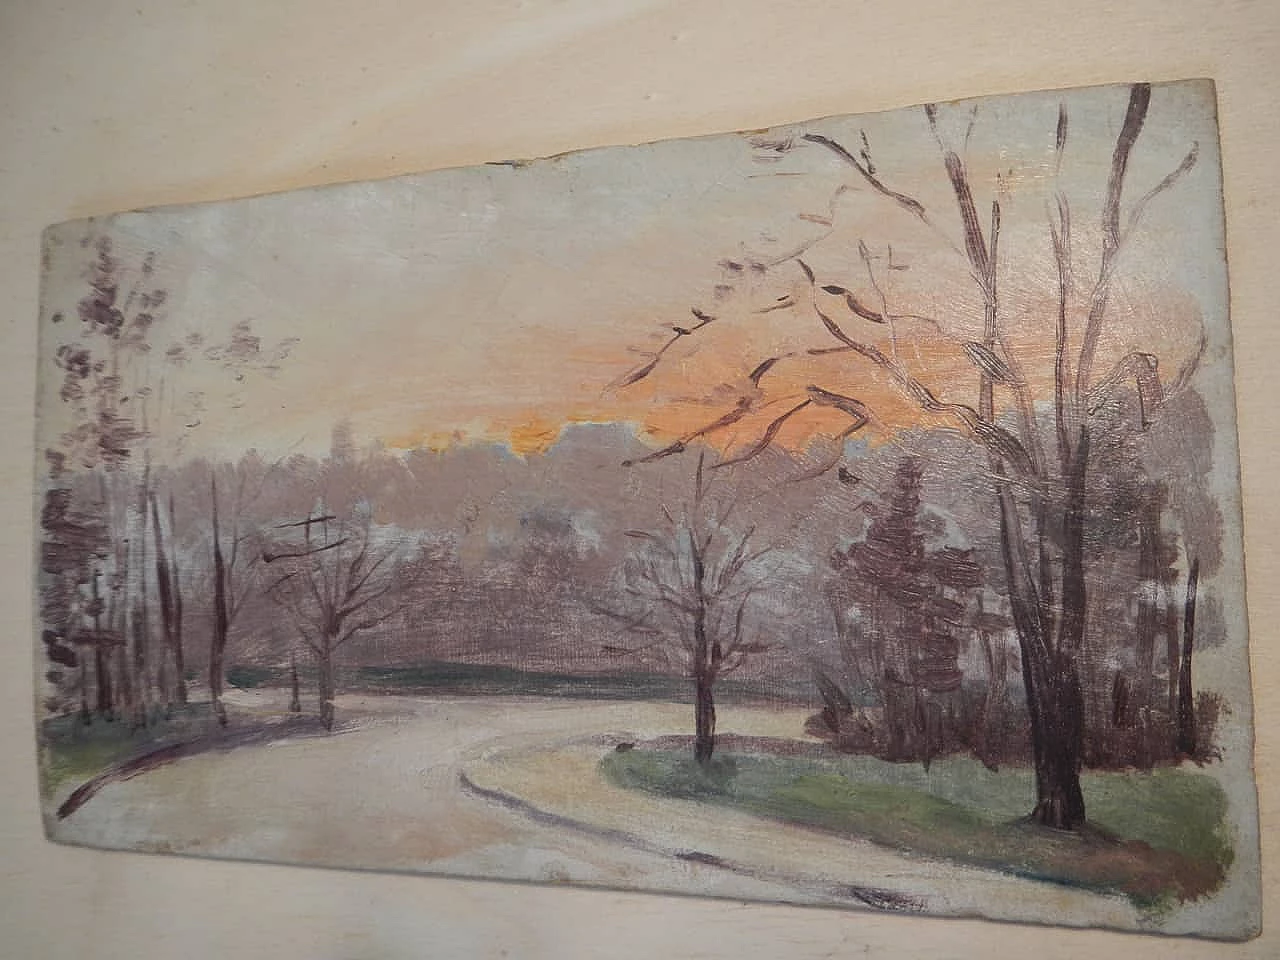 Des Champs, sunset, painting on wood, early 20th century 8